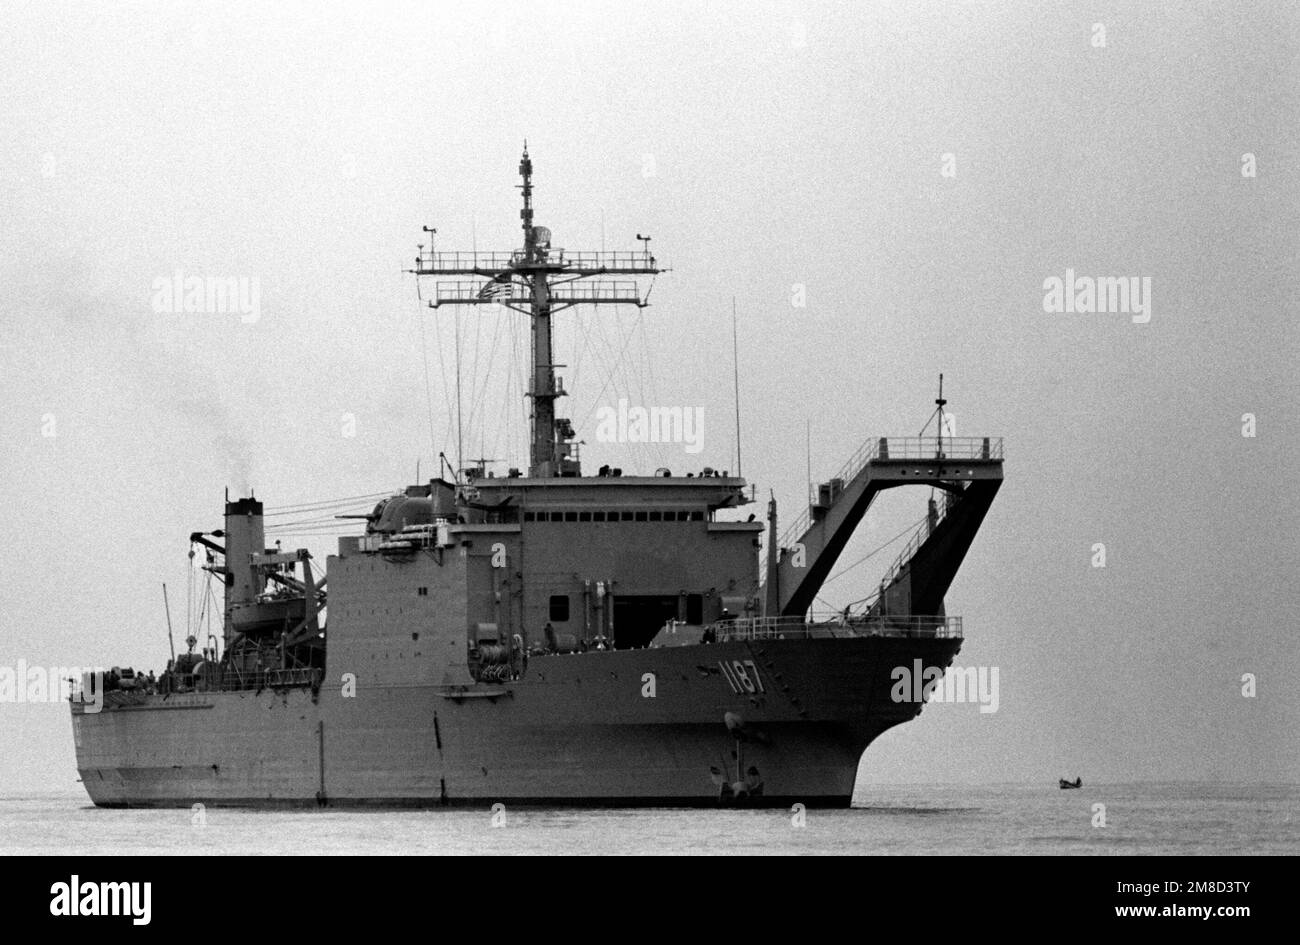 The tank landing ship USS TUSCALOOSA (LST-1187) sits off the coast during the combined South Korean/U.S. exercise Team Spirit '90. Subject Operation/Series: TEAM SPIRIT '90 Country: Republic Of Korea (KOR) Stock Photo